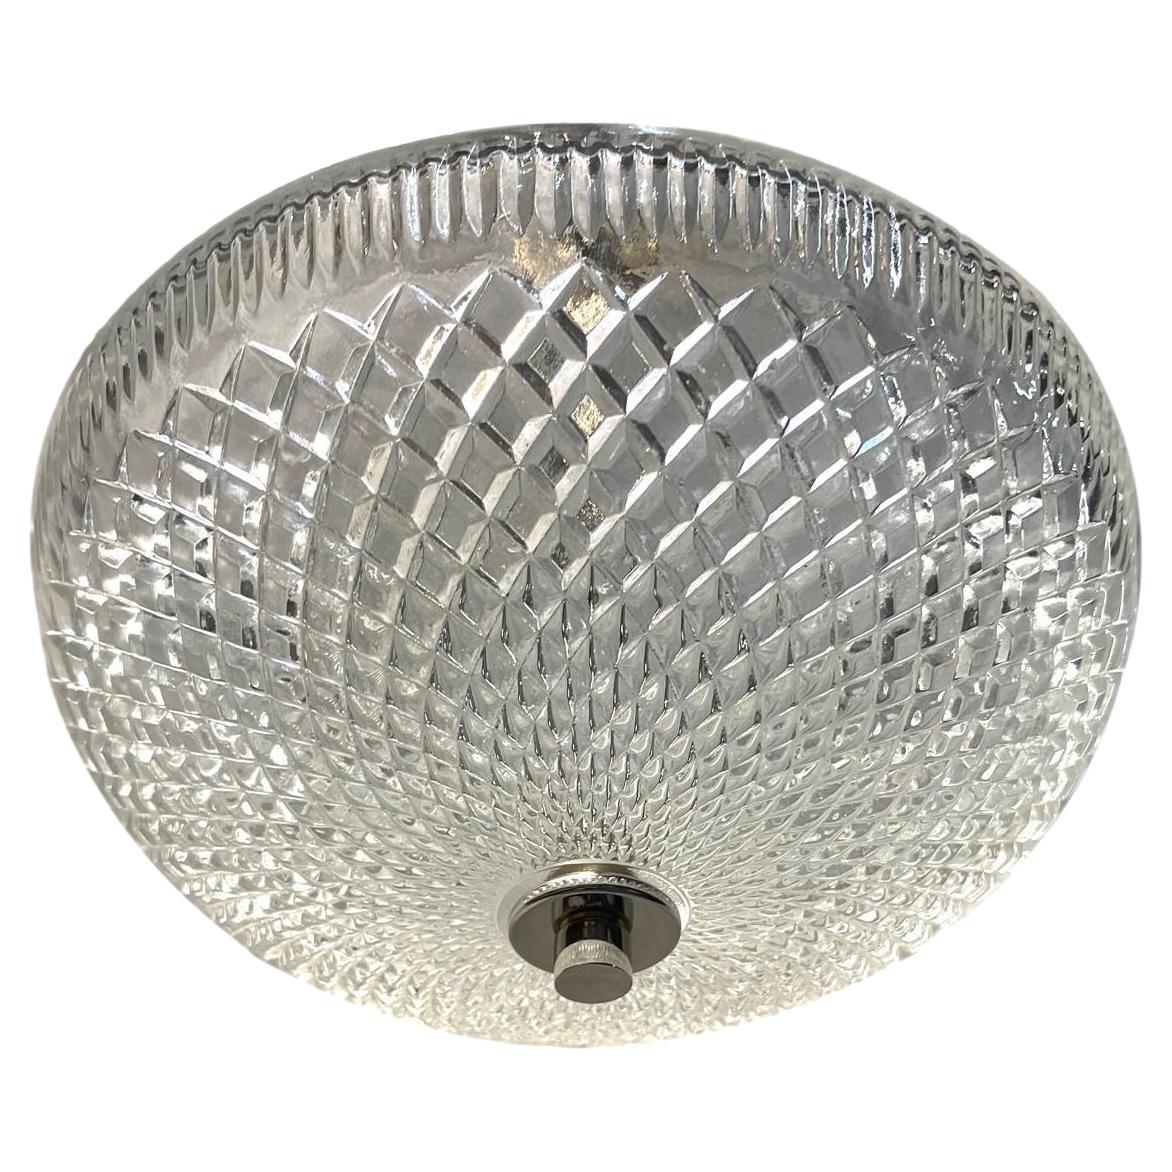 French Midcentury Cut Glass Light Fixture For Sale